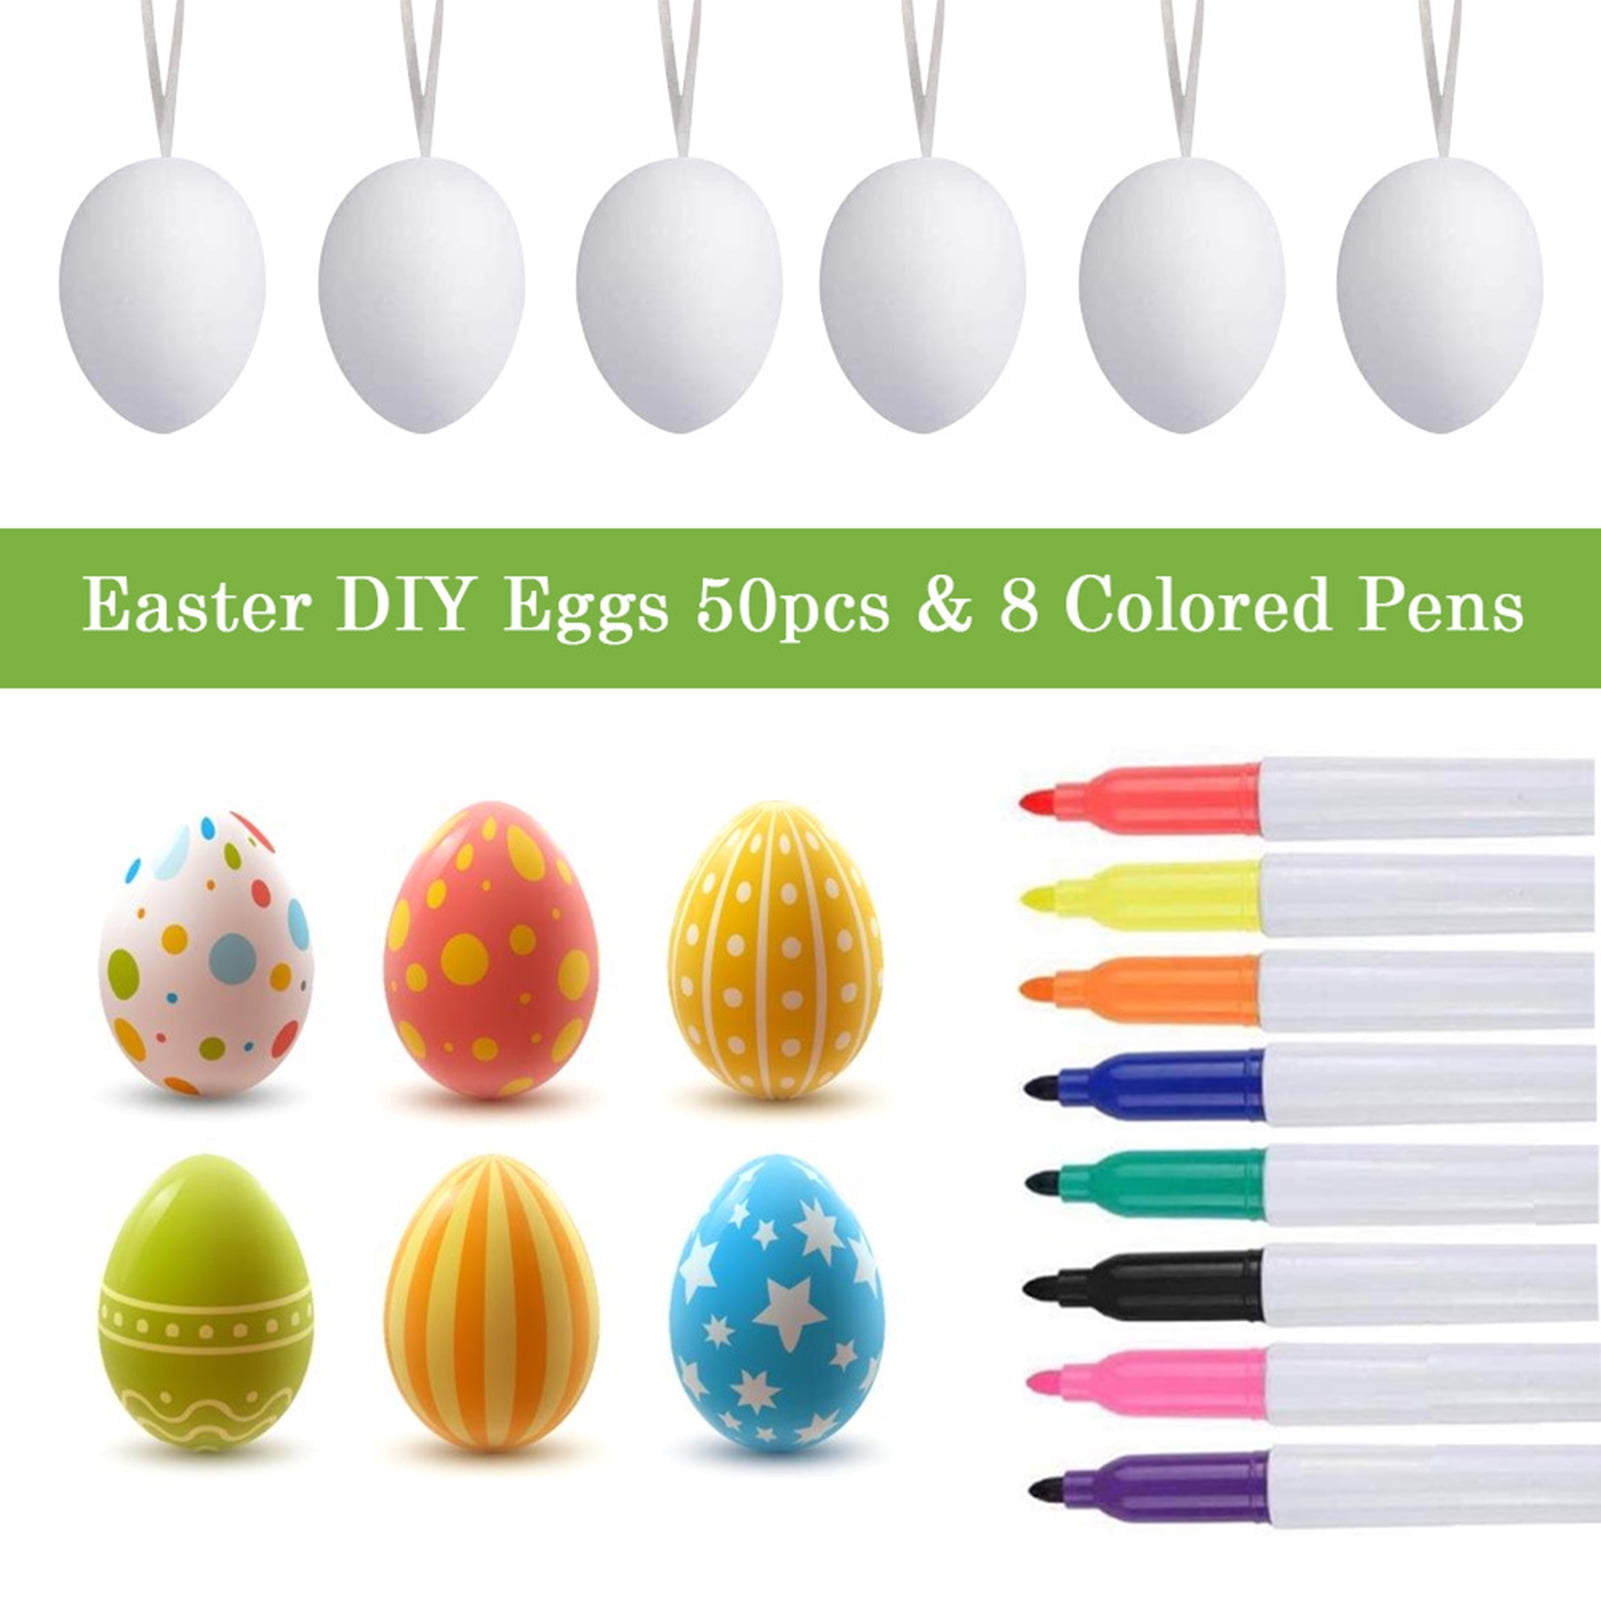 Happy Easter Party Supplies Bundle with Paper Plates & Napkins Easter Egg Fun Party Pack Serves 16 Guests Perfect for Your Easter Celebration. Cute & Colorful Easter Egg Design 